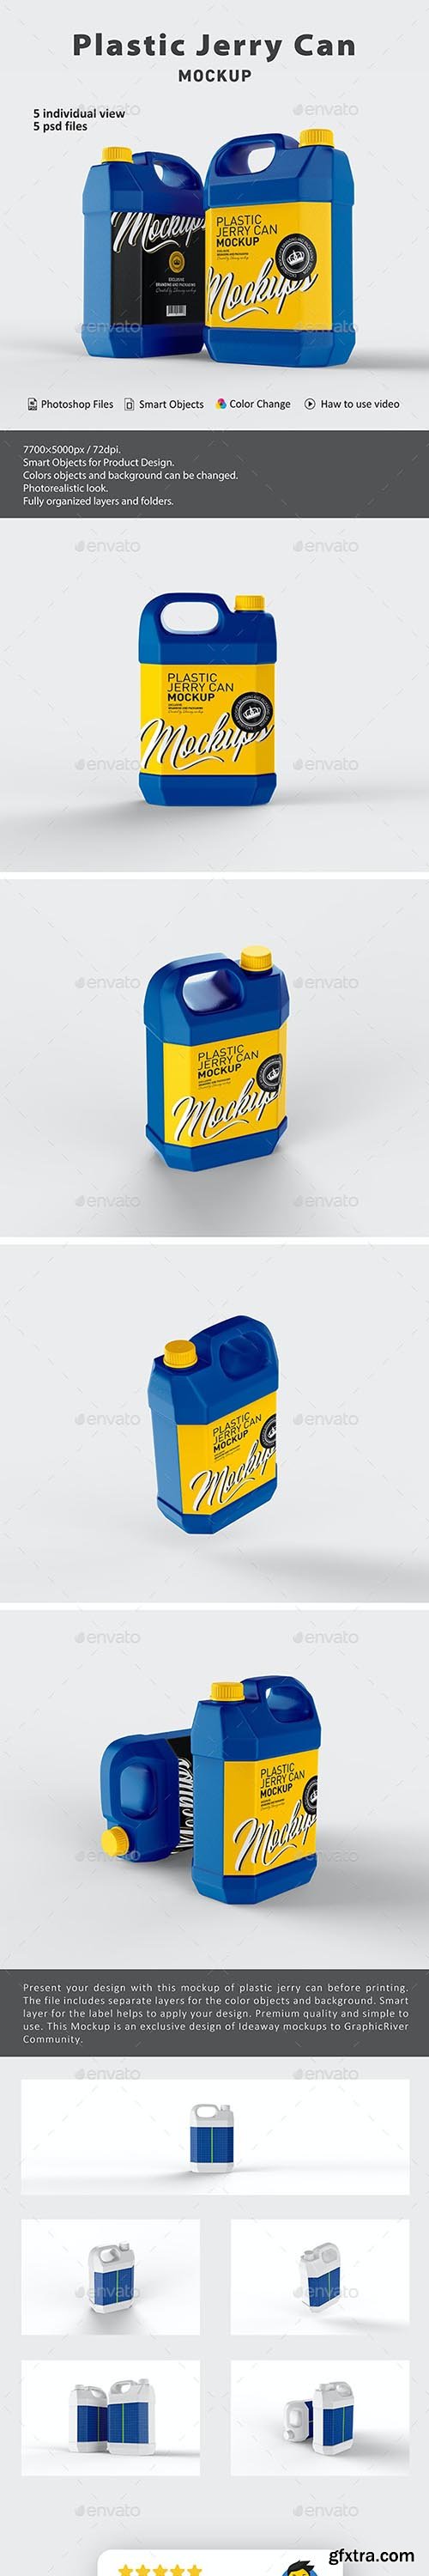 GraphicRiver - Plastic Jerry Can Mockup 26561750